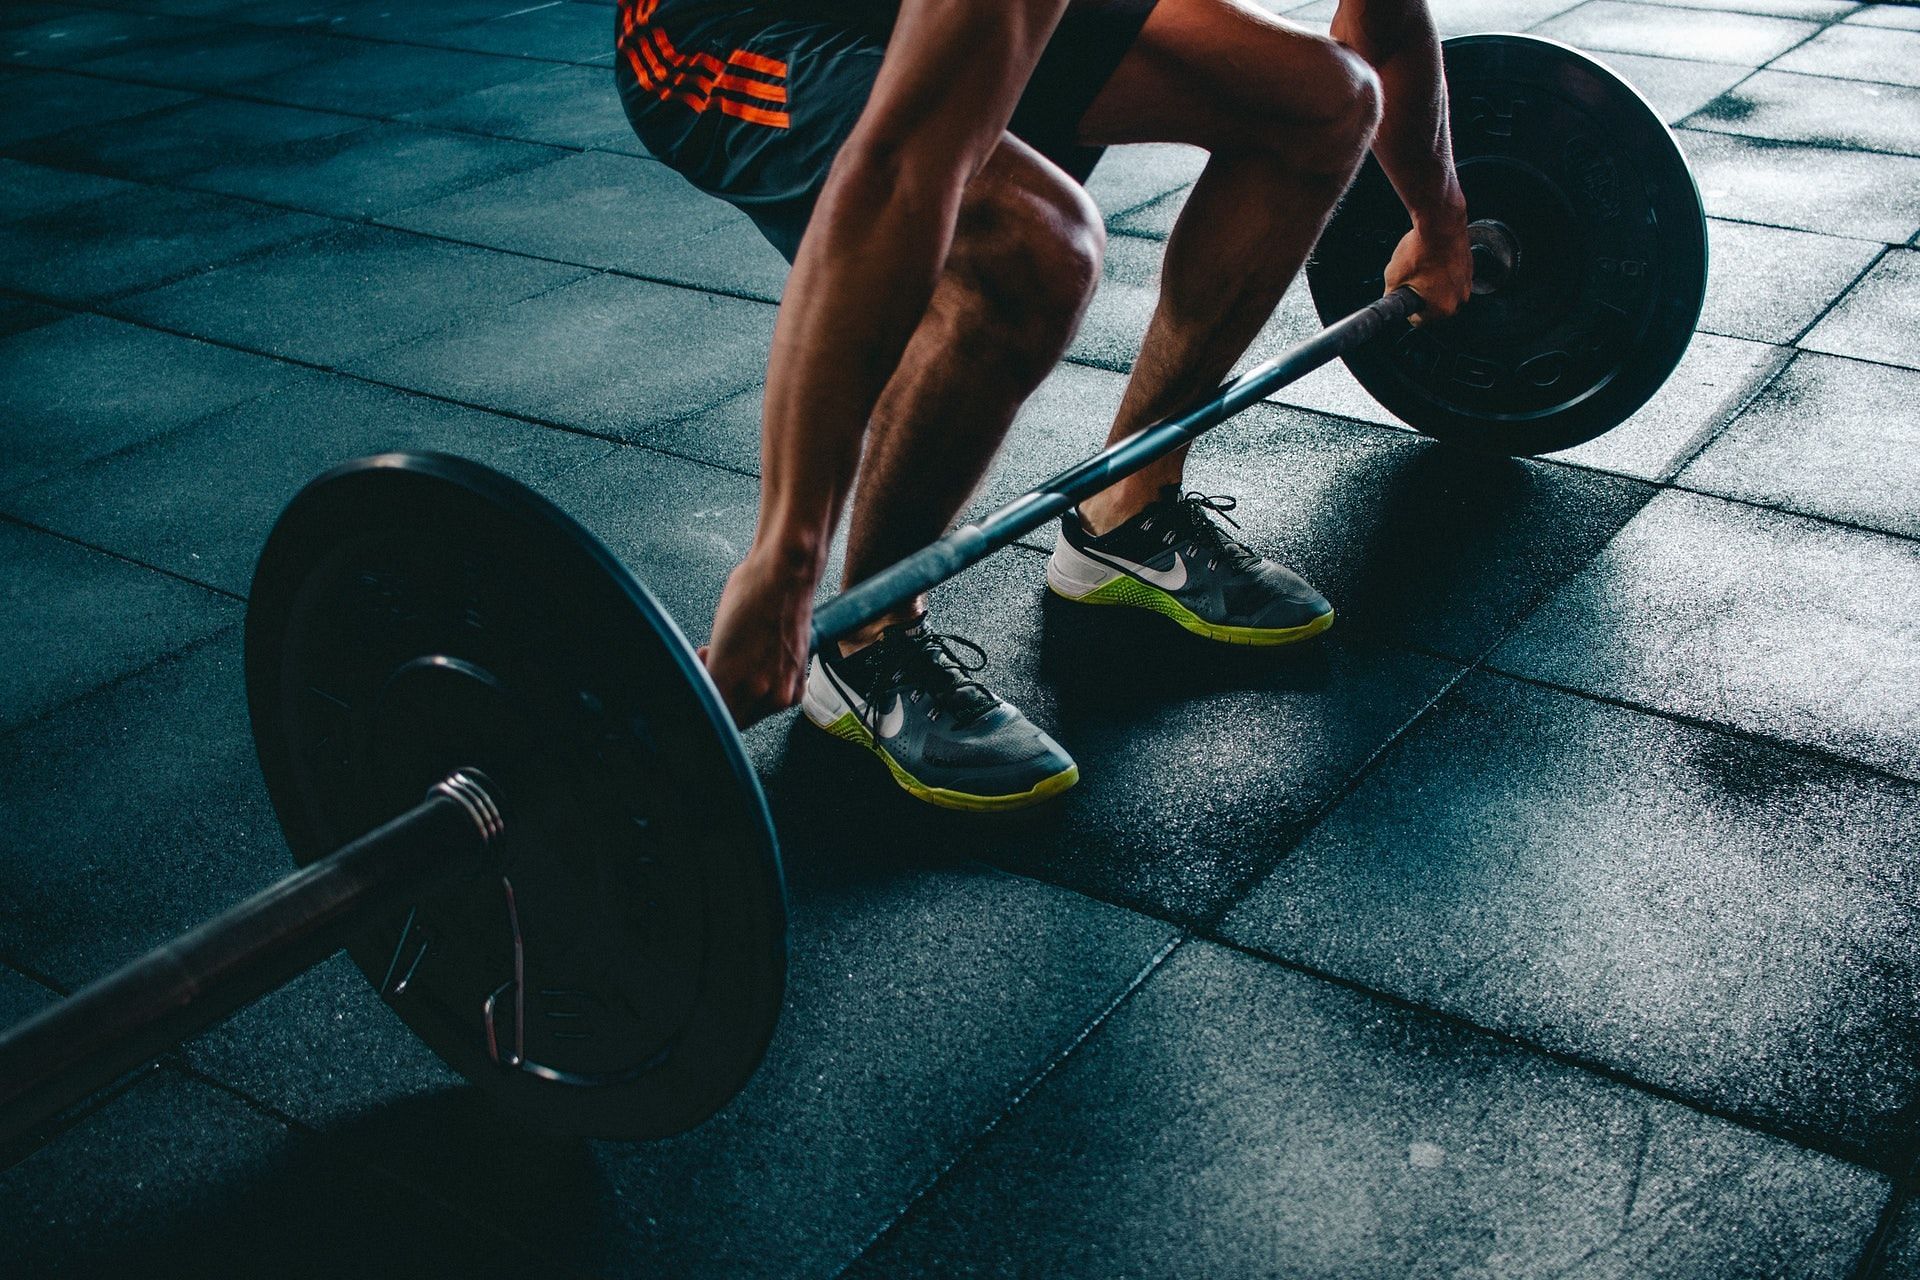 There are various dangerous weight-lifting exercises to avoid. (Photo by Victor Freitas via pexels)